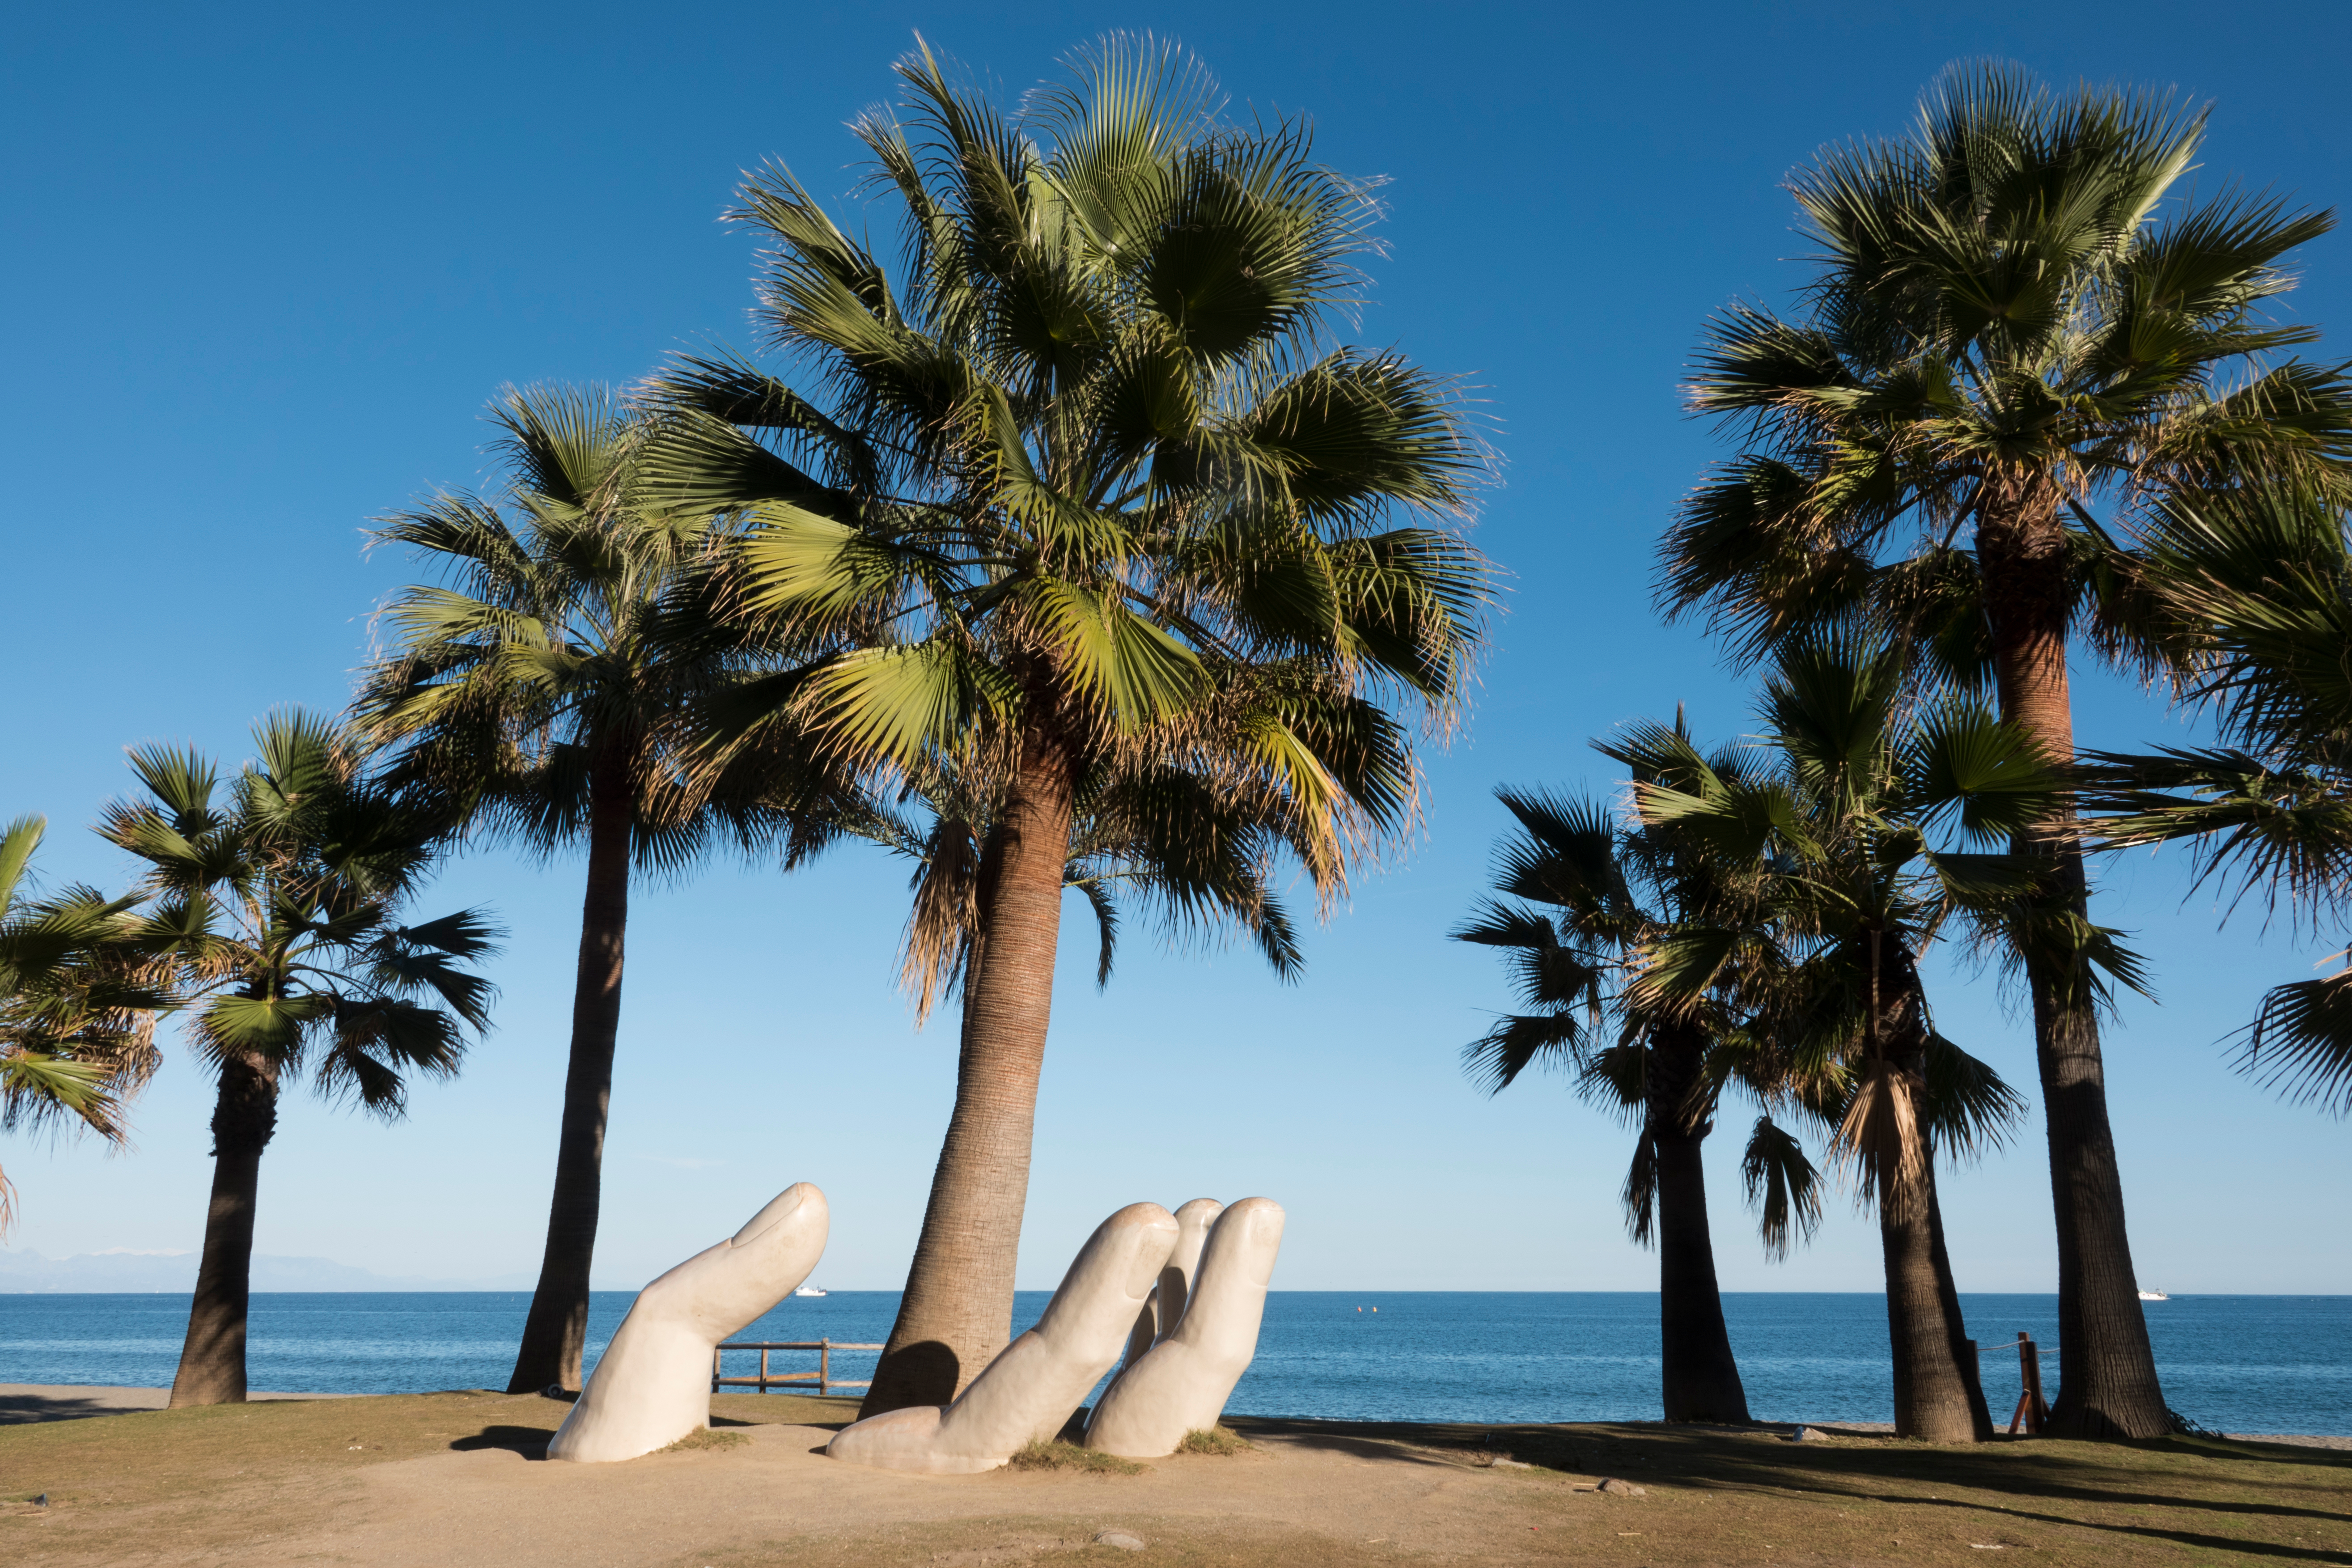 The Open Hand sculpture by Charo Garcia is just one of the many draws to the luscious beaches